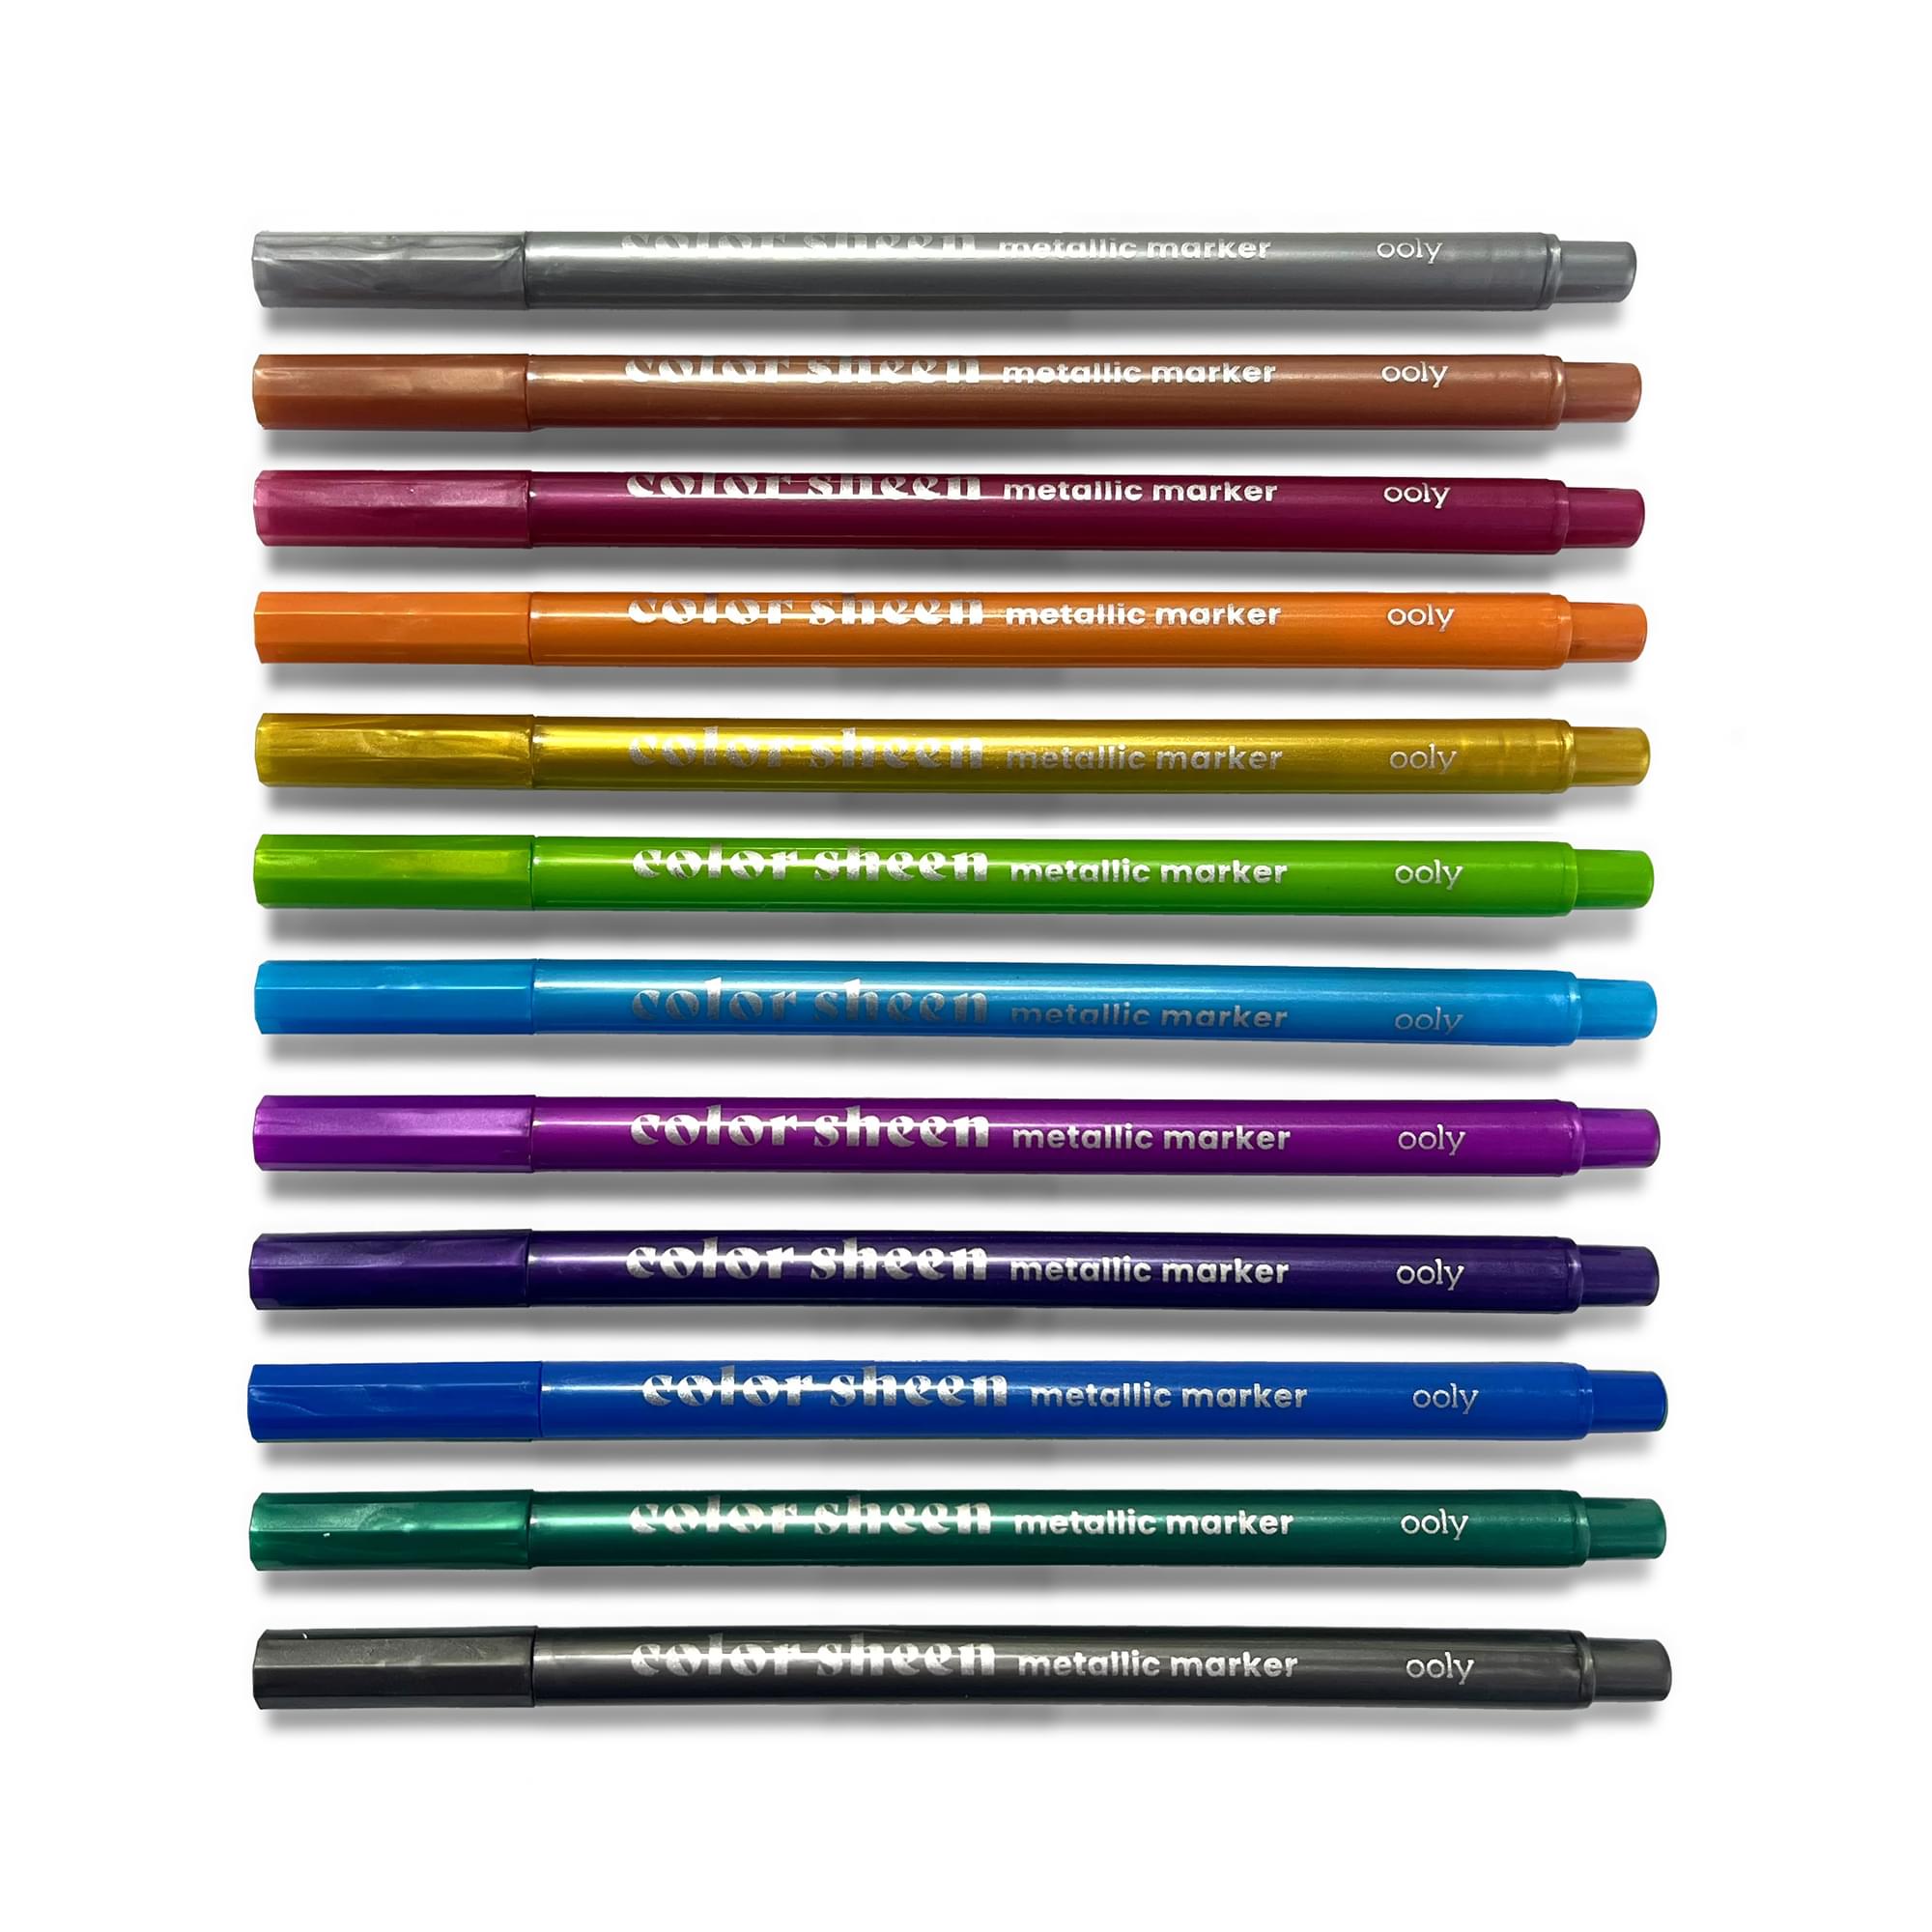 Color Sheen Metallic Colored Felt Tip Markers out of packaging and in row